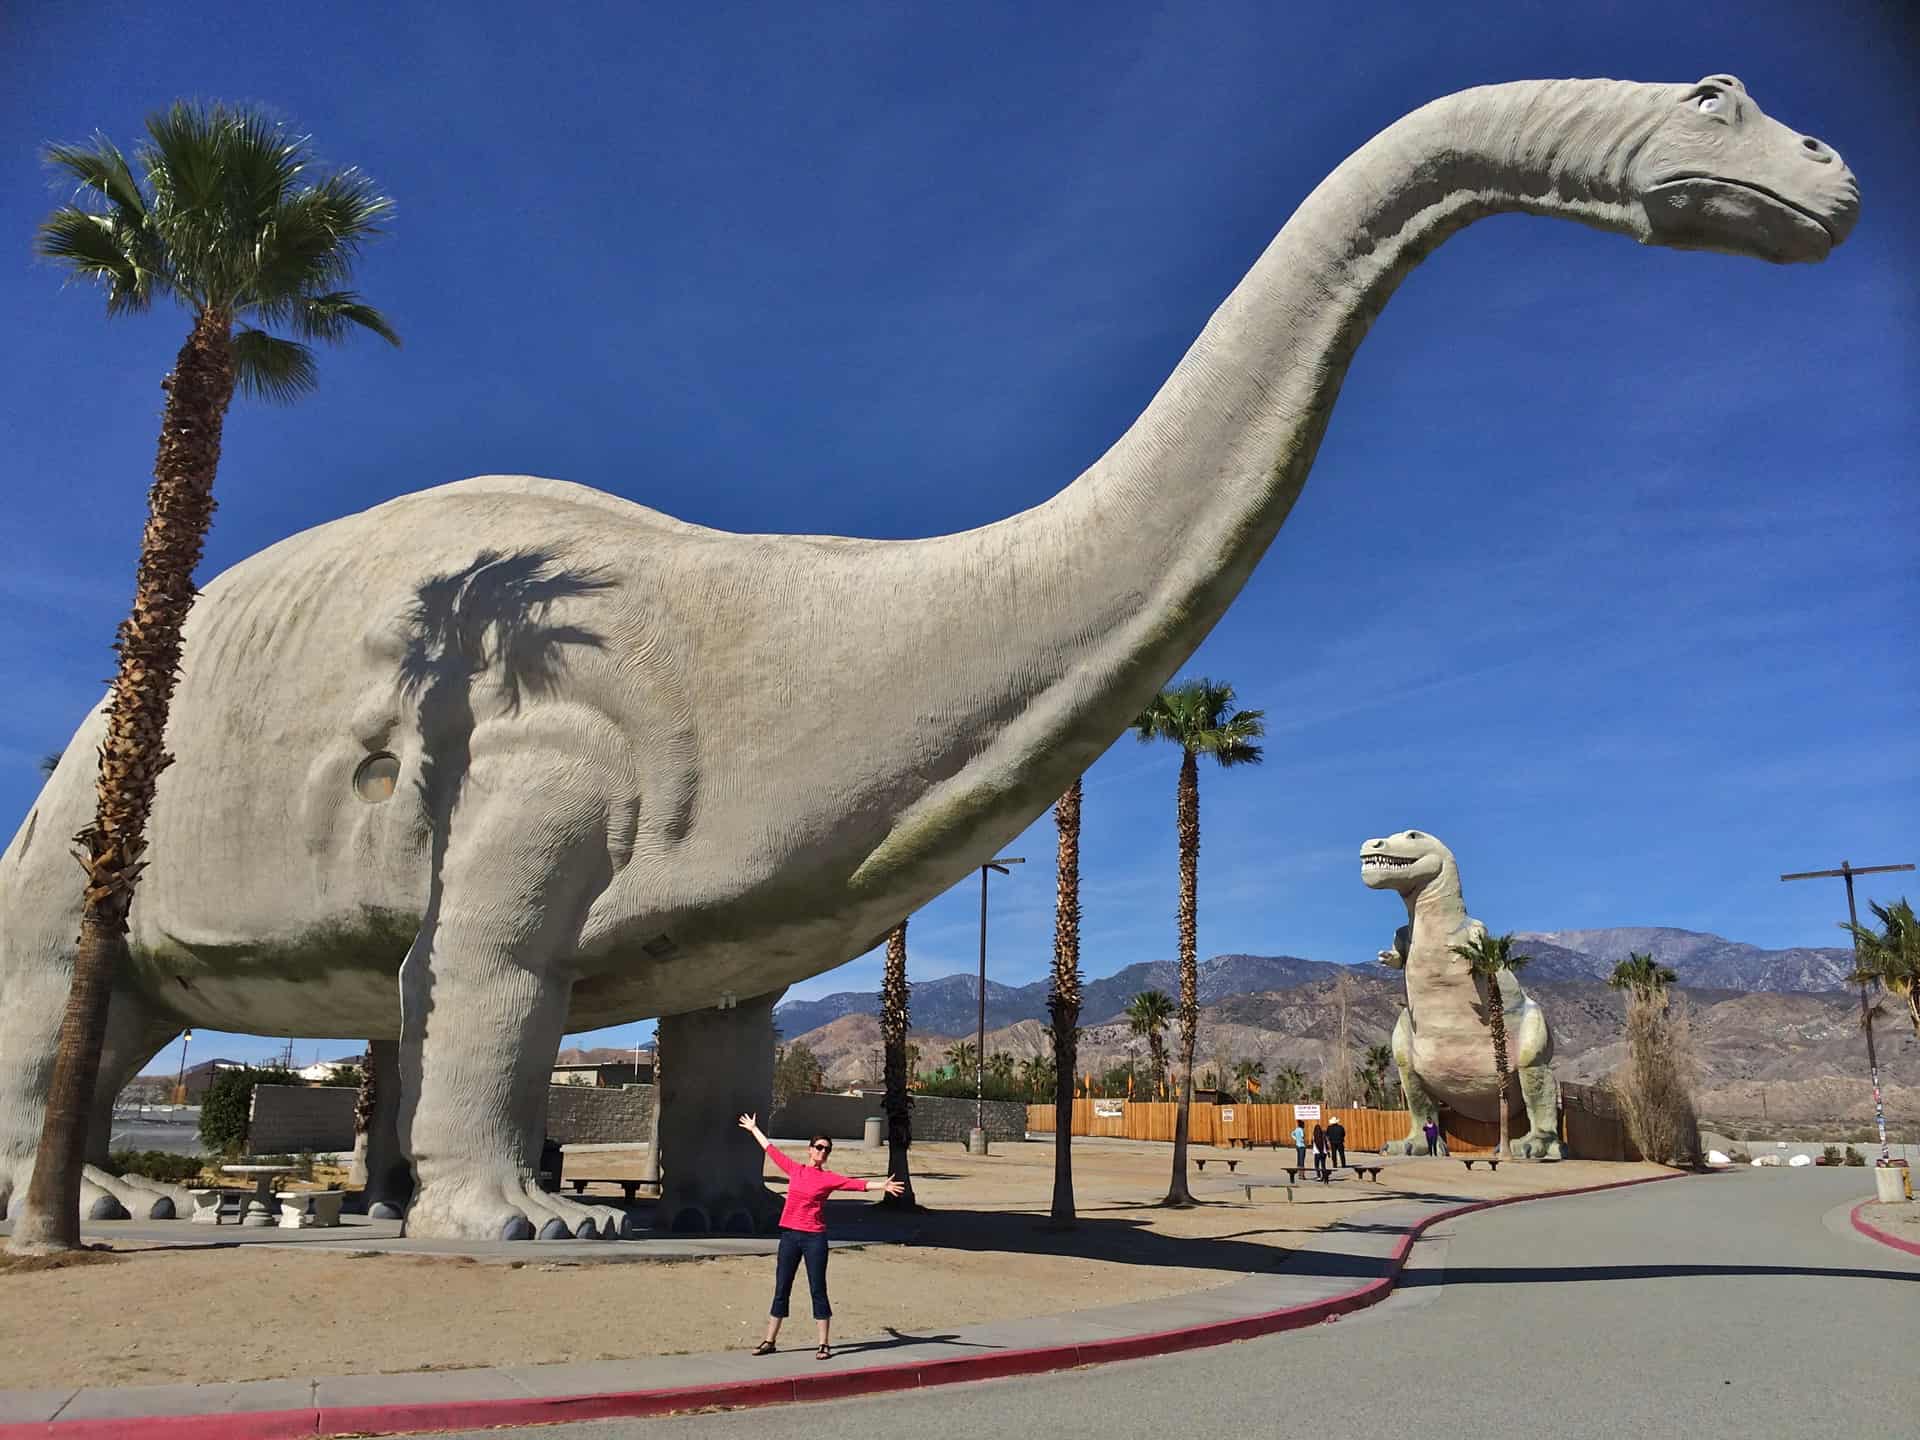 Giant Dinosaurs in the Desert – Not Just in Pee Wee's Movie! – Retro